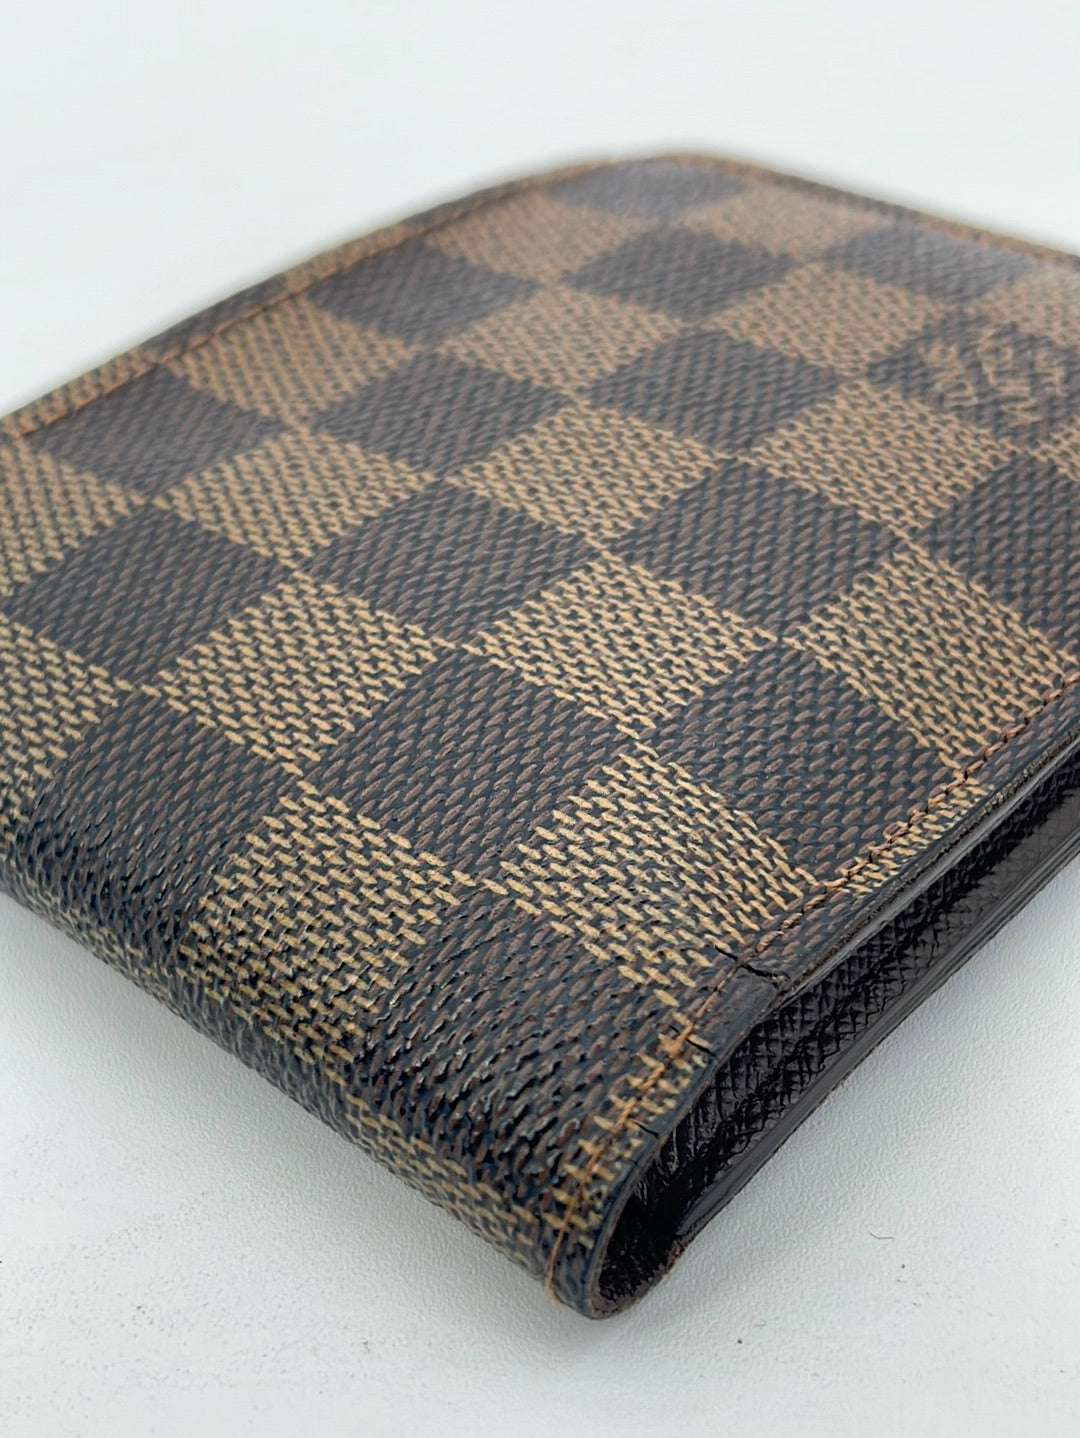 Louis Vuitton Used Wallet - 669 For Sale on 1stDibs  preloved louis  vuitton wallet, vuitton inspired wallet for sale, used louis vuitton wallet